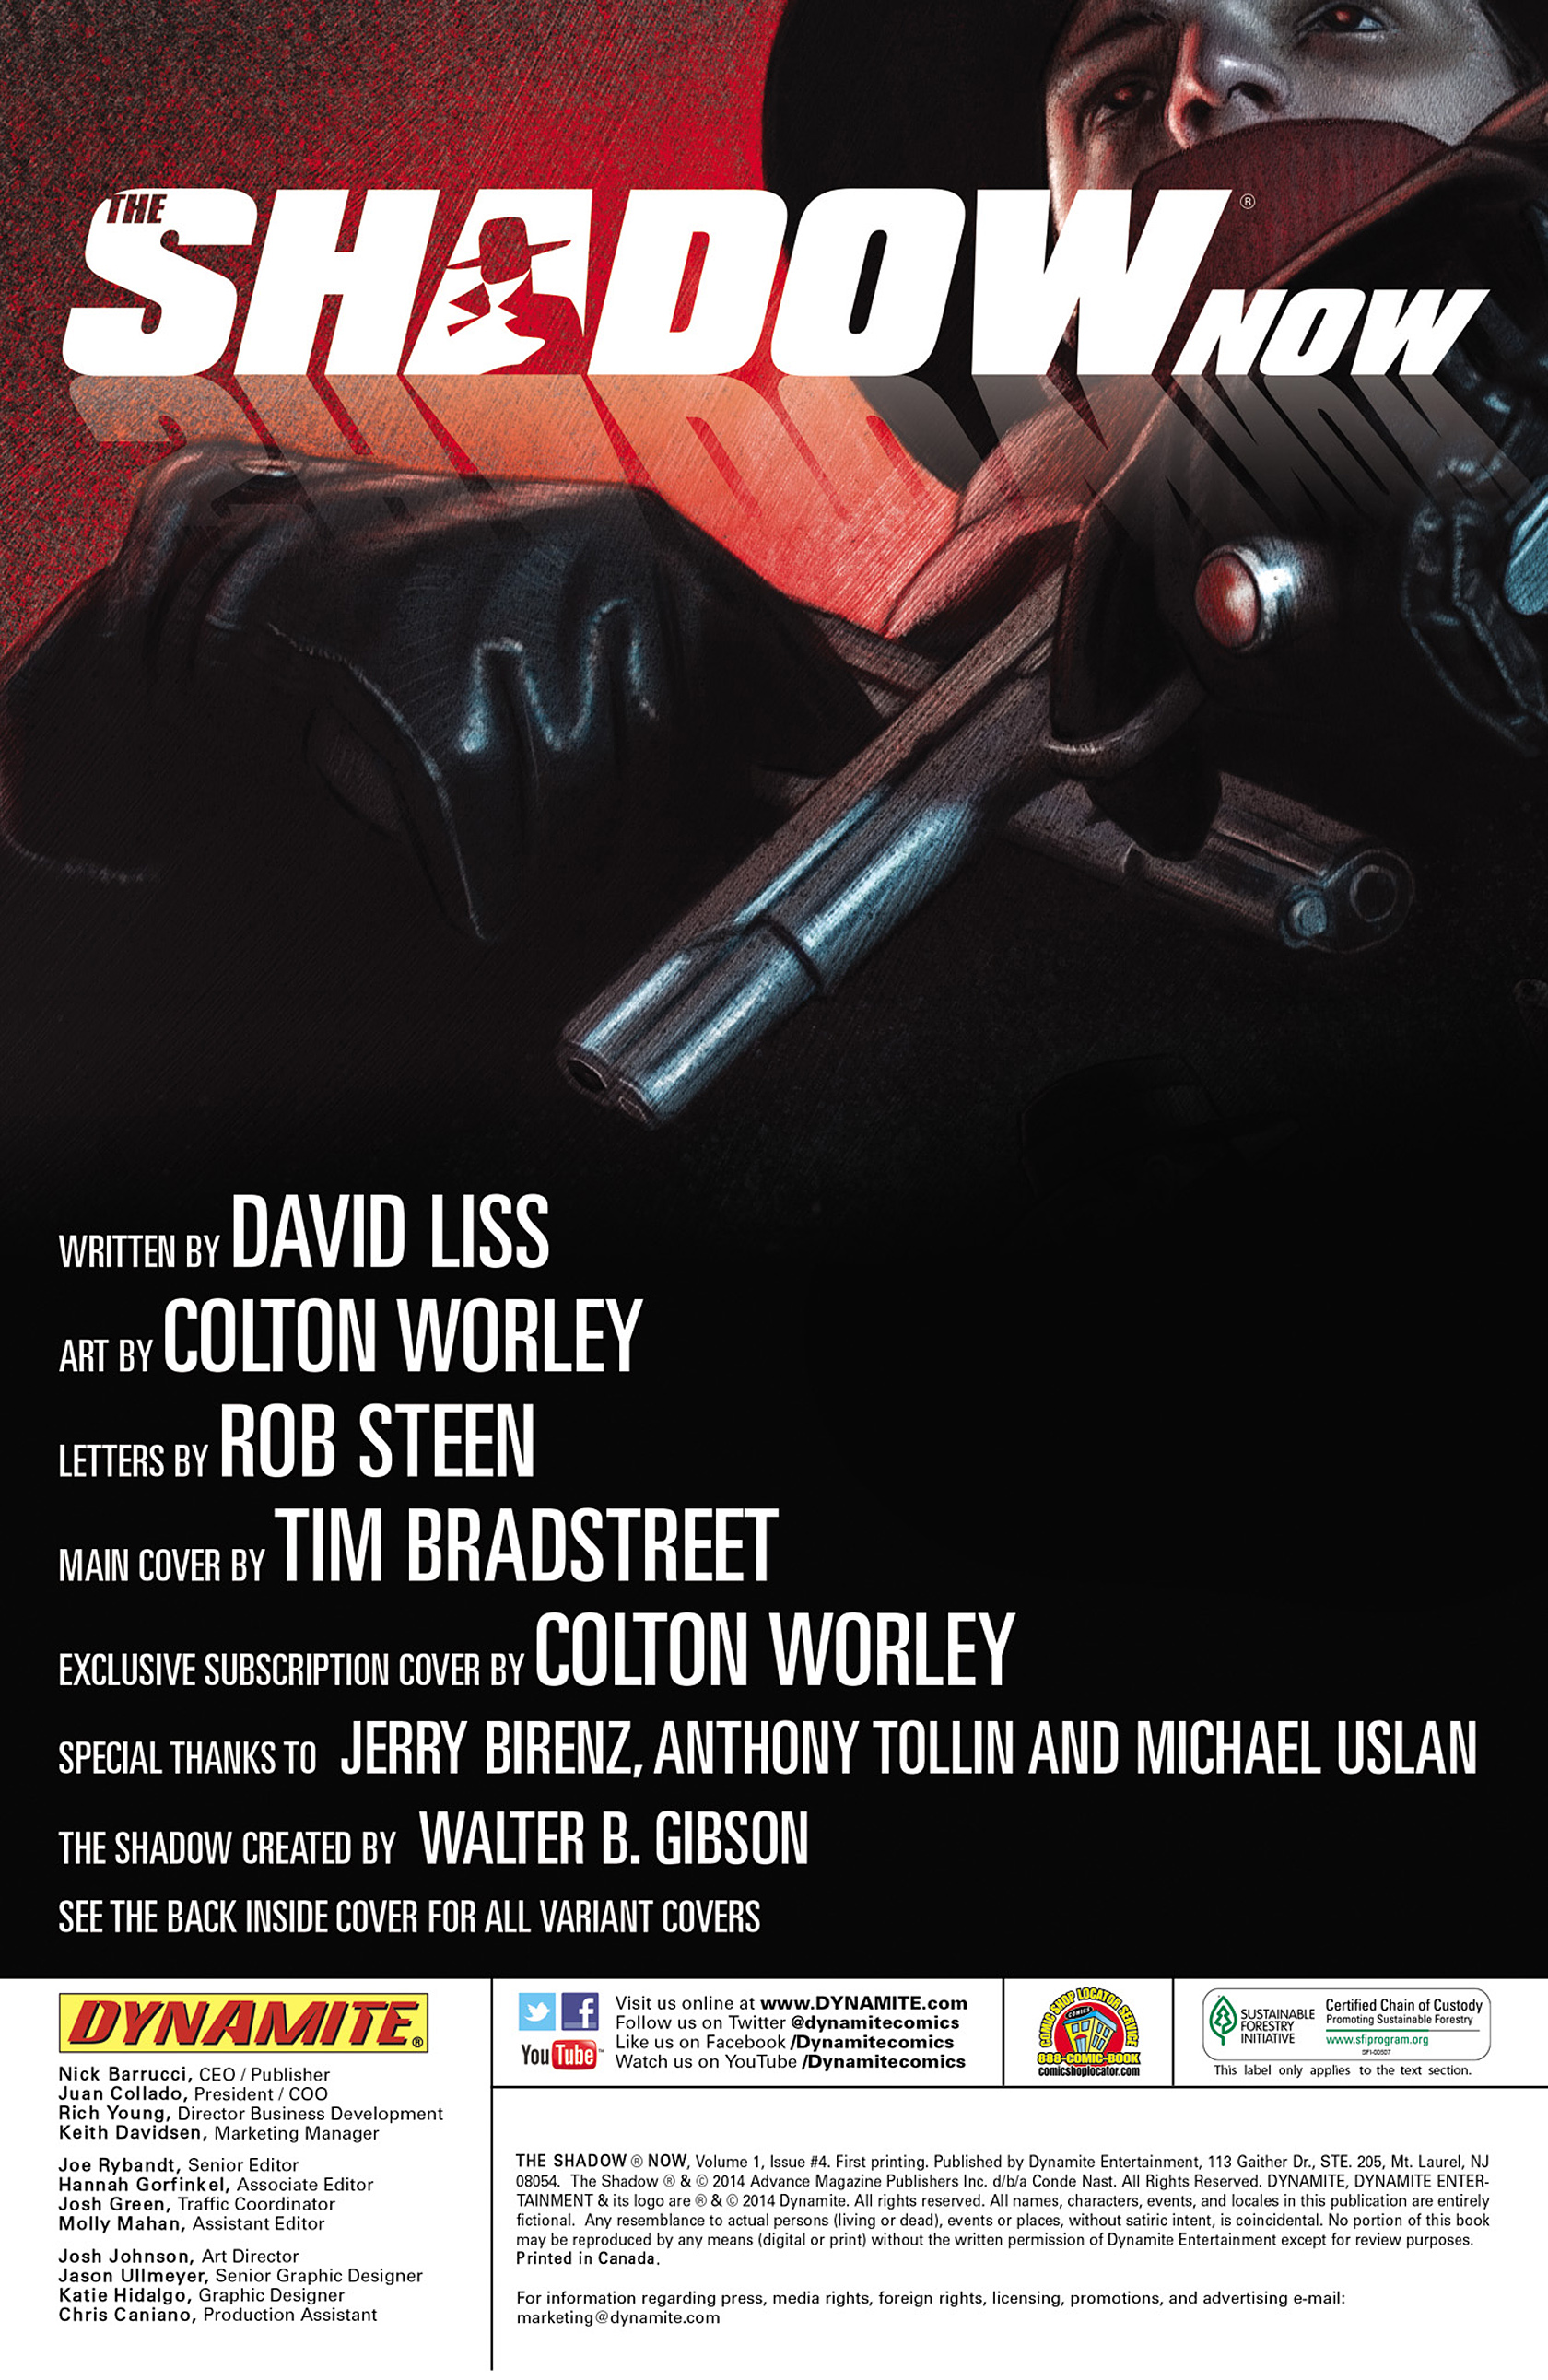 Read online The Shadow Now comic -  Issue #4 - 2